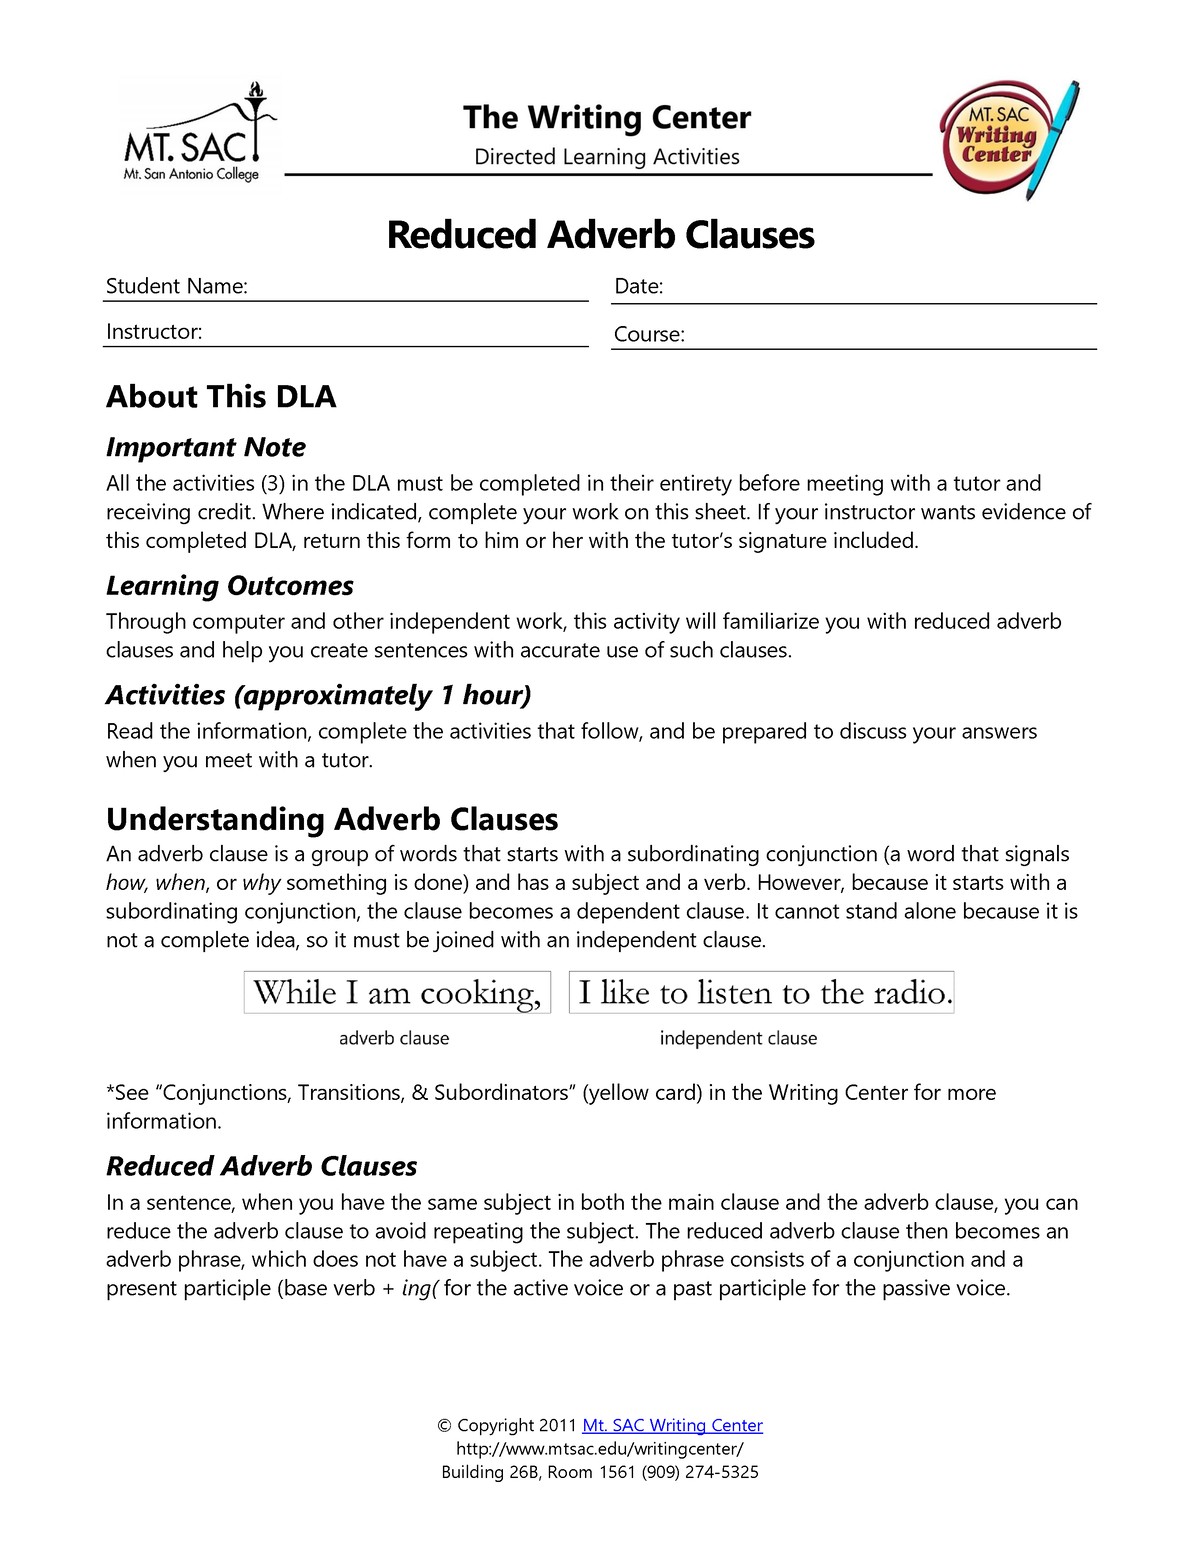 theory-and-exercises-reduced-adverbial-clause-copyright-2011-mt-sac-writing-center-studocu